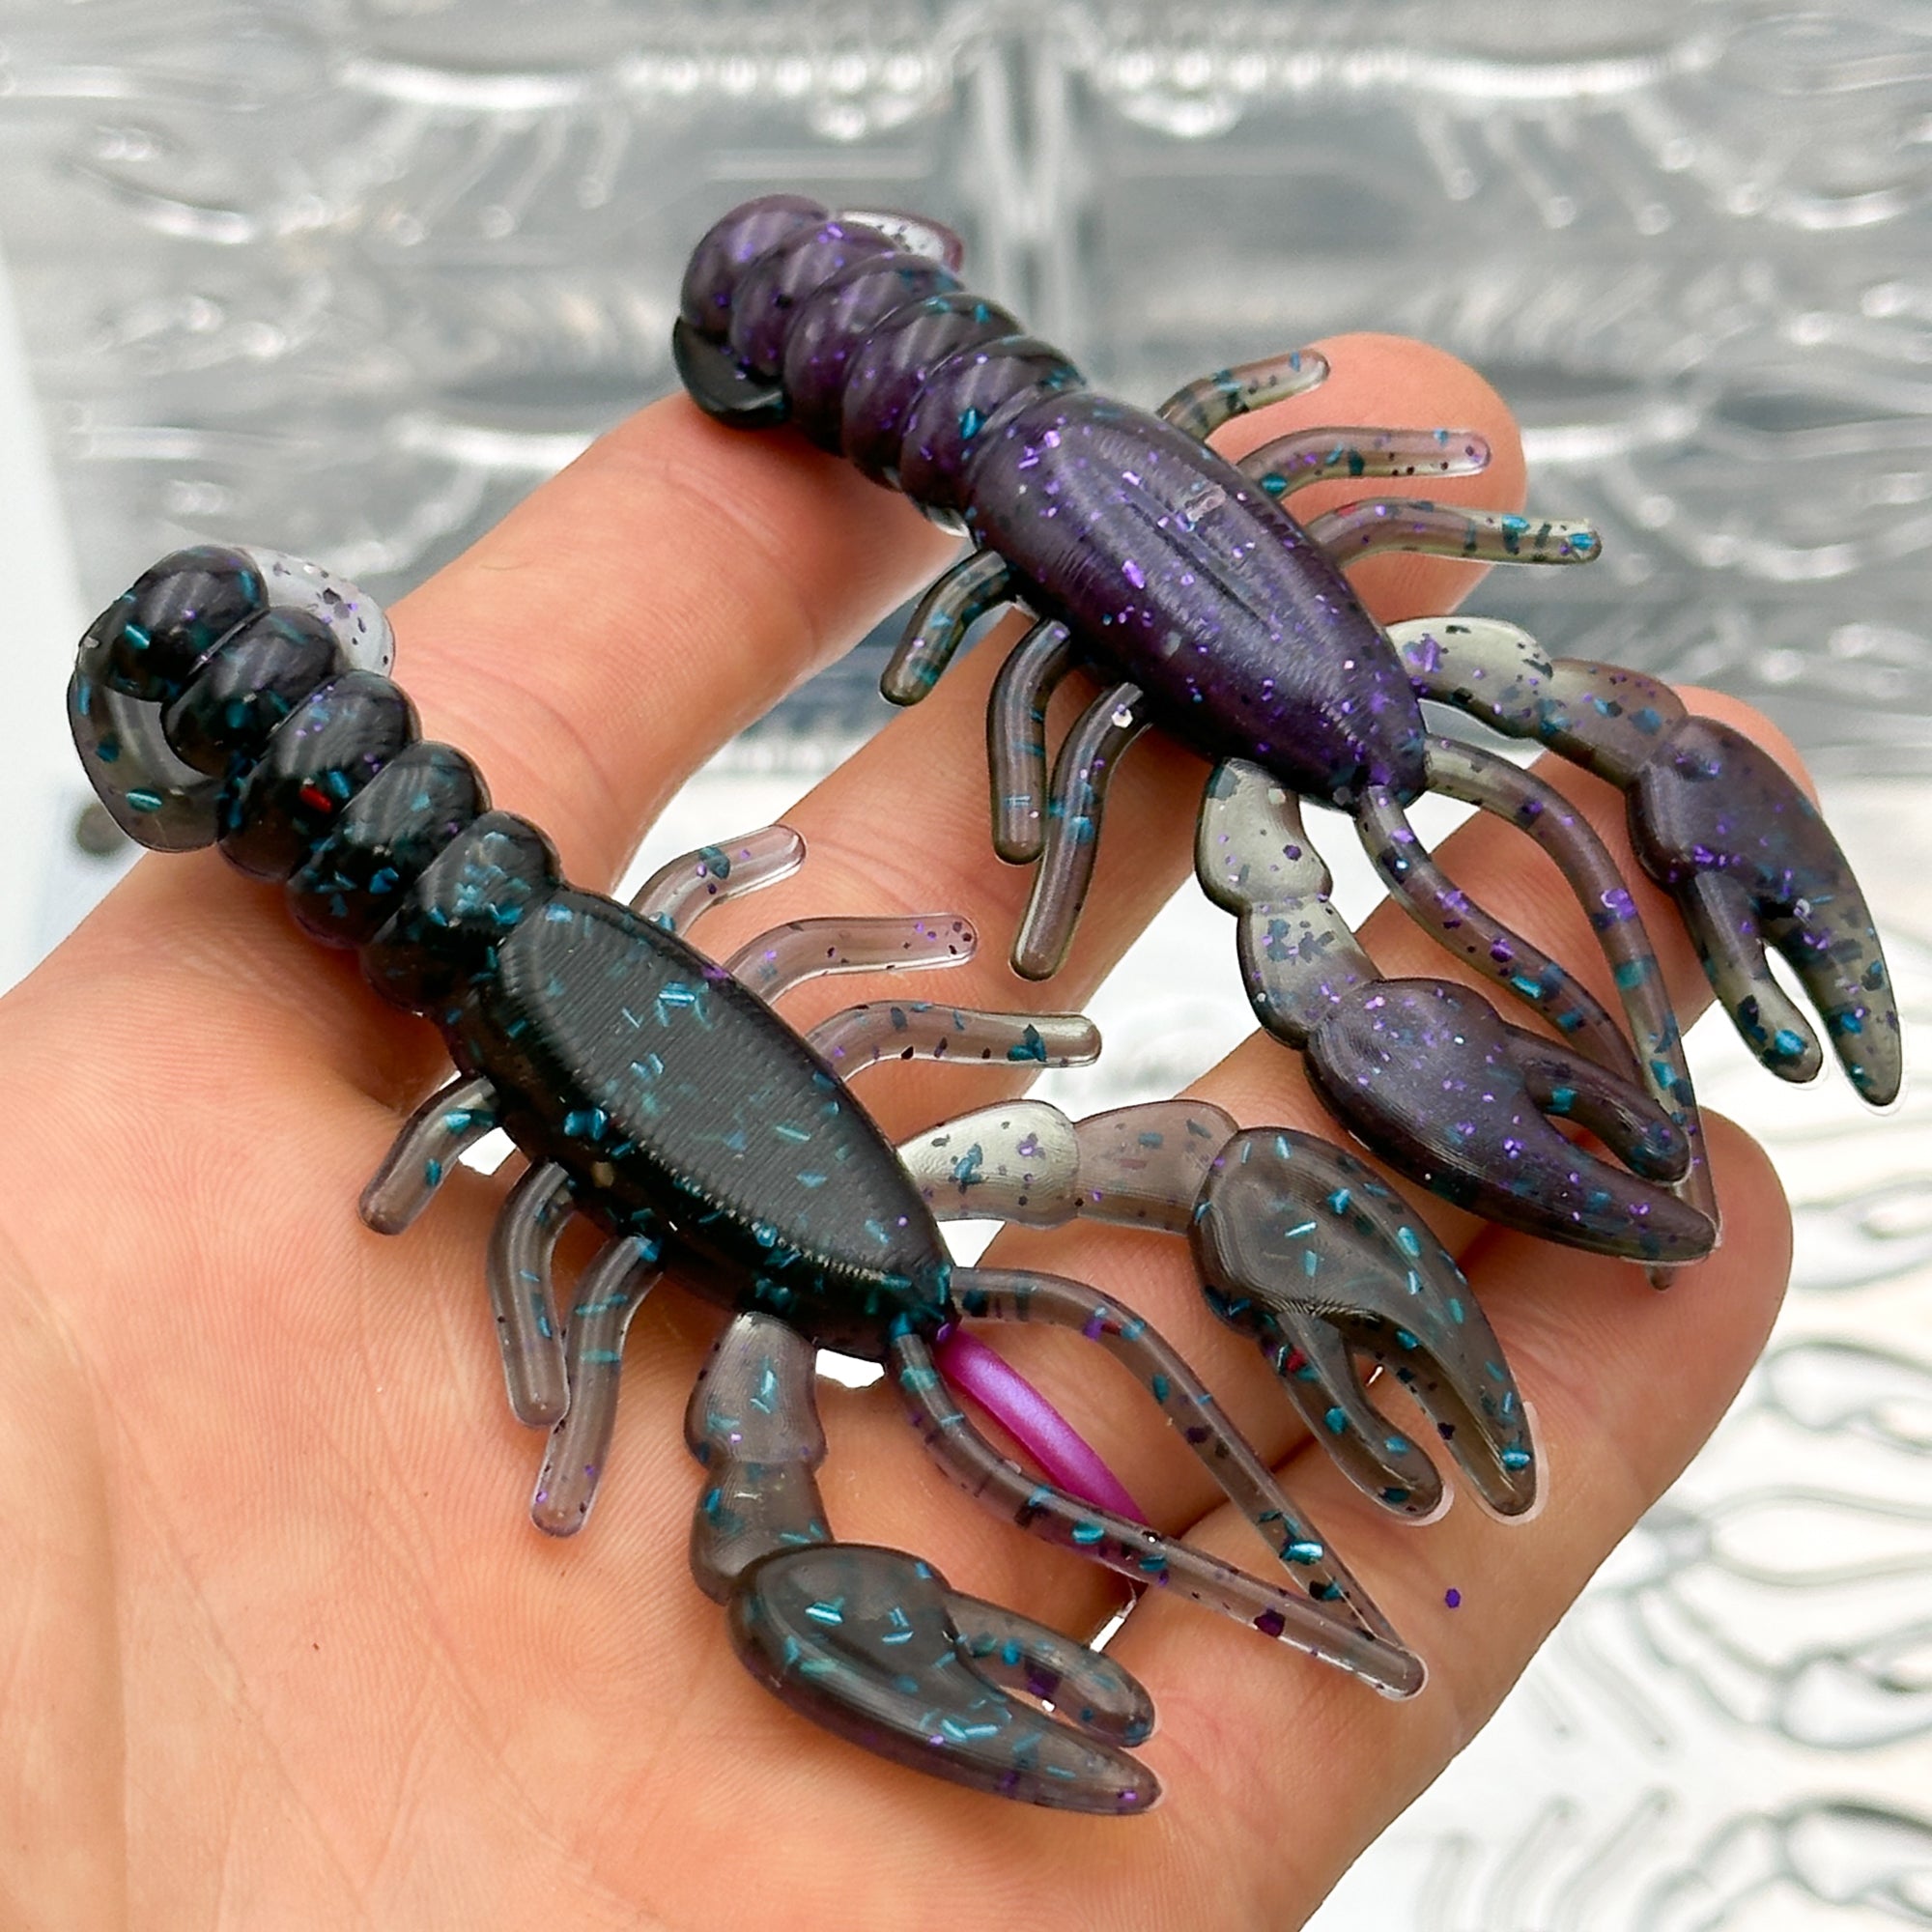 3.4 Inch Glory Craw Hand Injection Mold – Epic Bait Molds